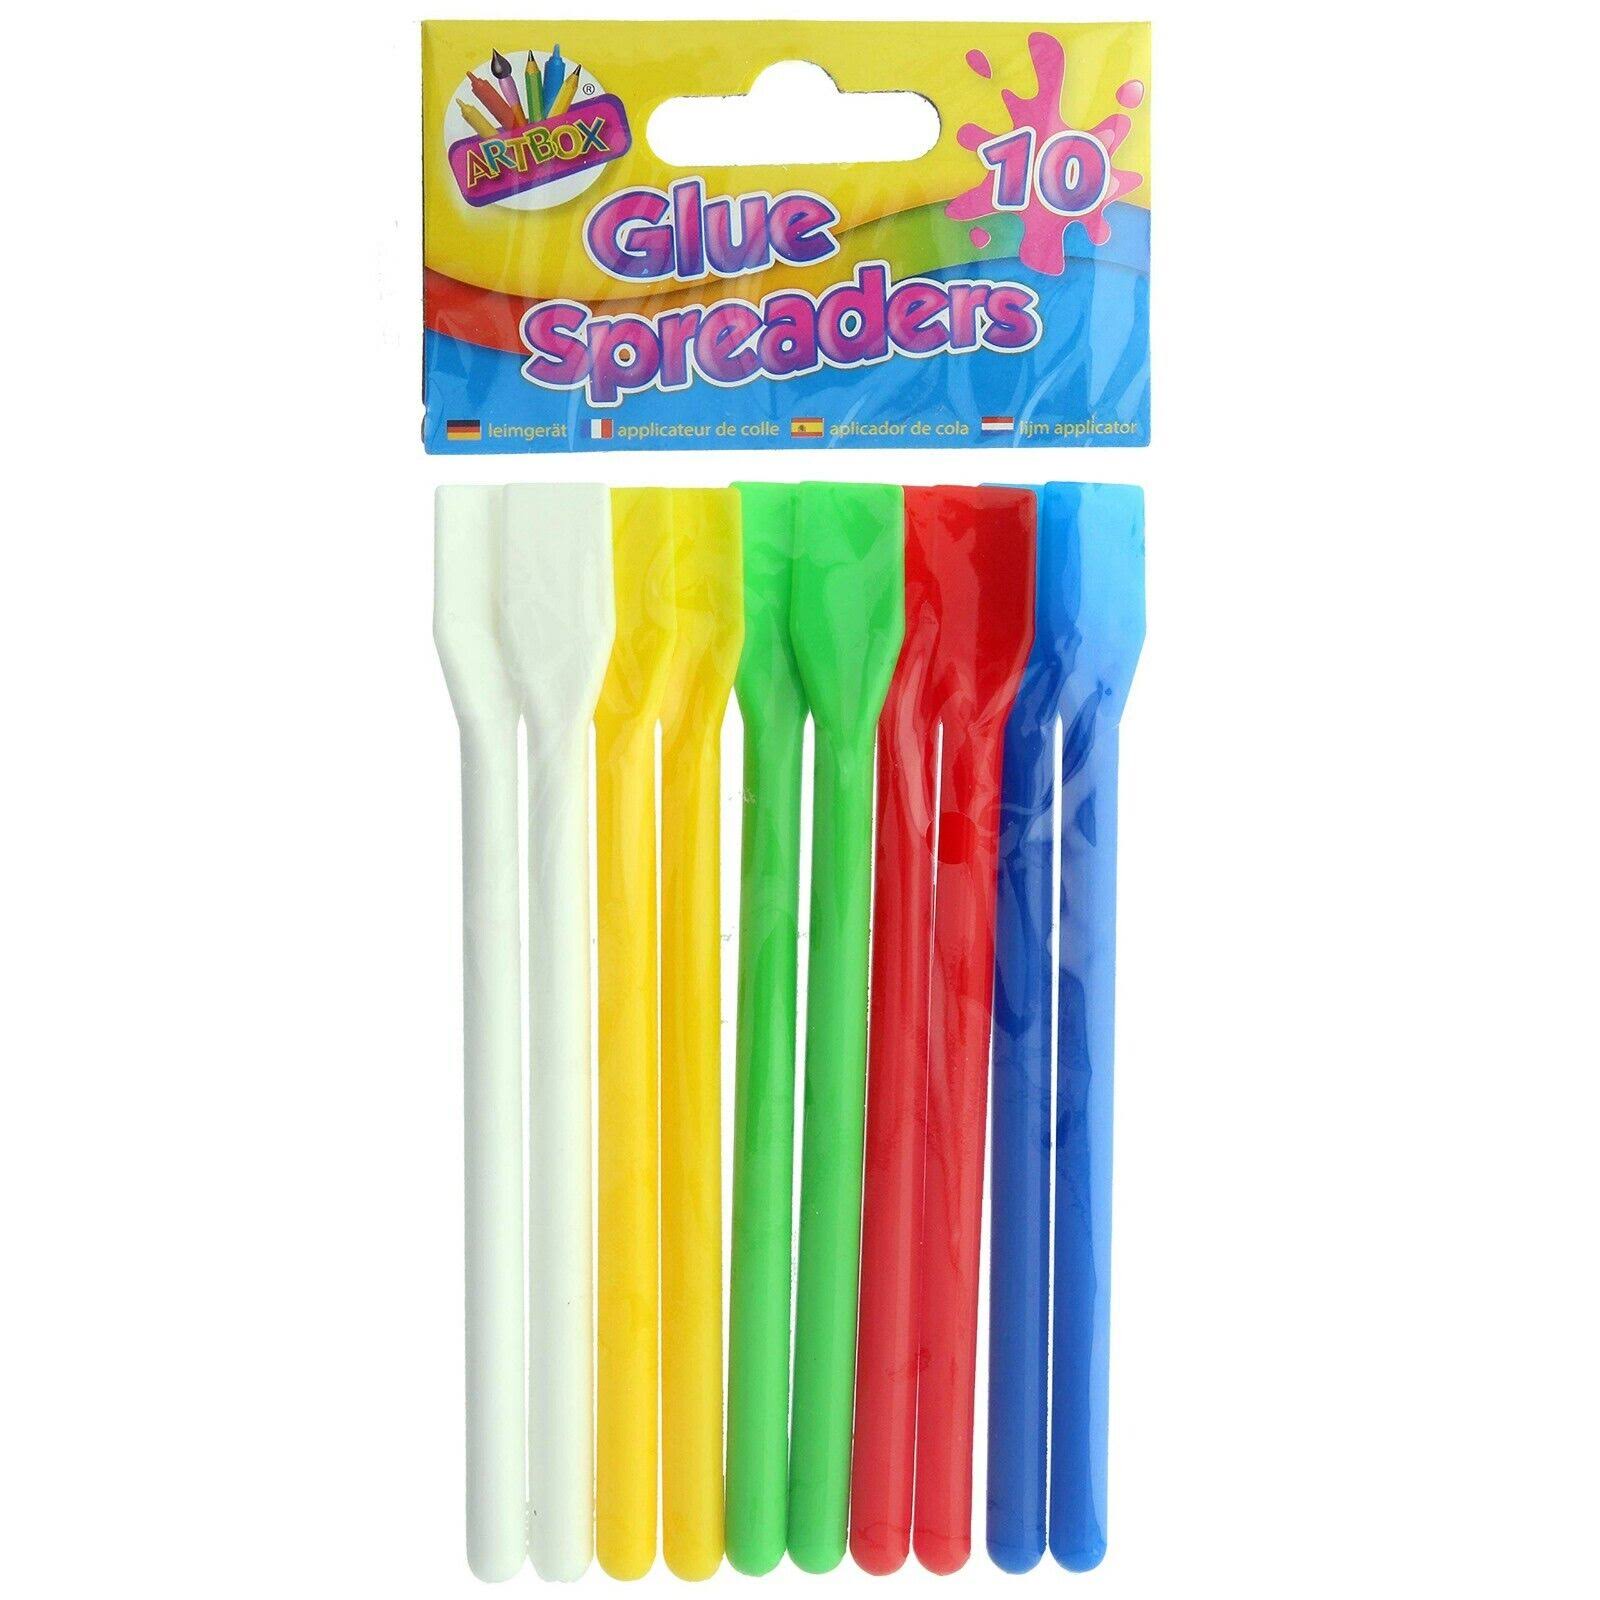 Artbox 5-Inch Coloured Glue Spreader (Pack of 10)